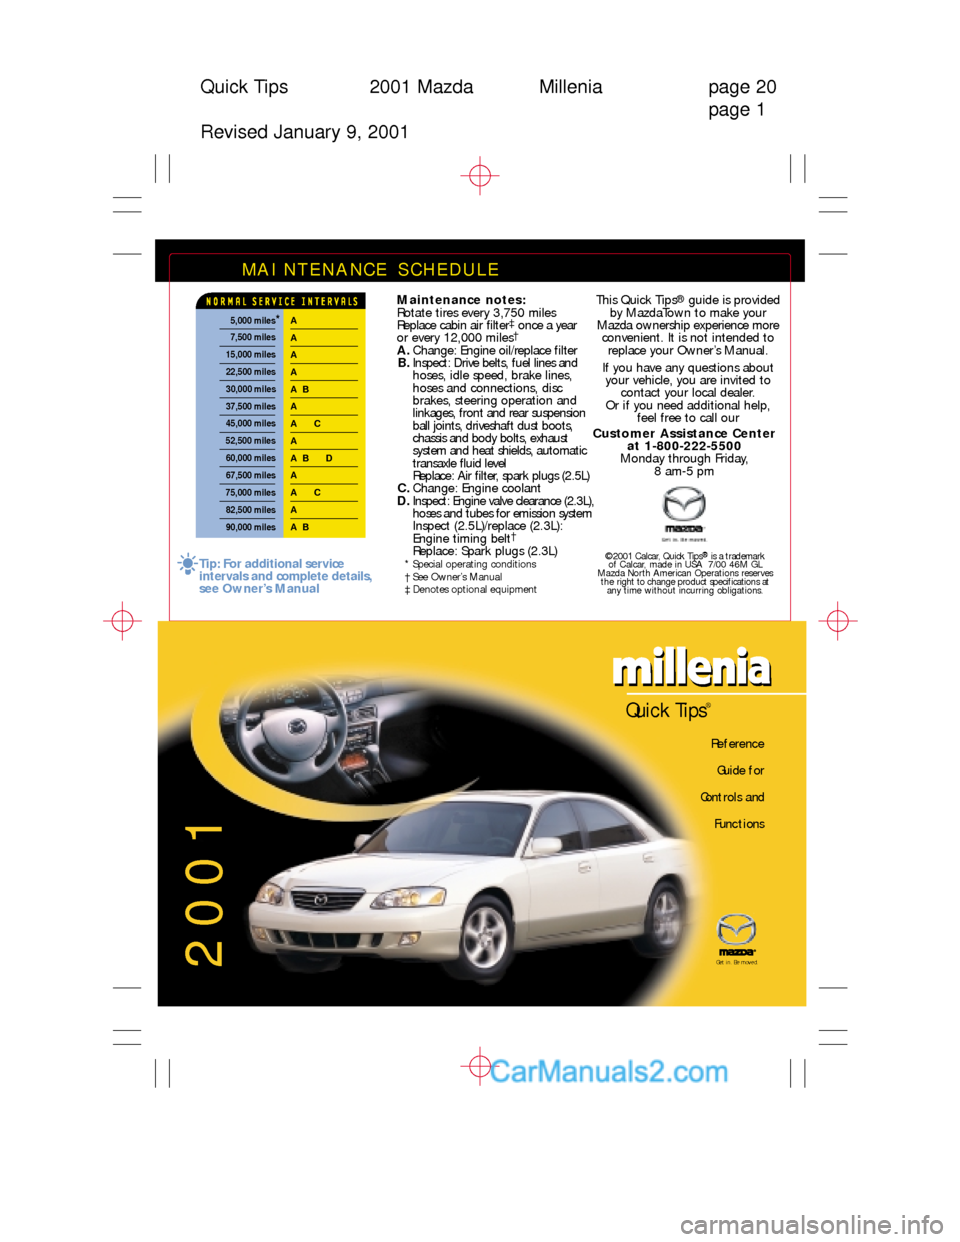 MAZDA MODEL MILLENIA 2001  Quick Tips (in English) Quick Tips 2001 Mazda Millenia page 20
page 1
Revised January 9, 2001
MAINTENANCE SCHEDULE 
Maintenance notes:
Rotate tires every 3,750 miles
Replace cabin air filter
‡once a year 
or every 12,000 m